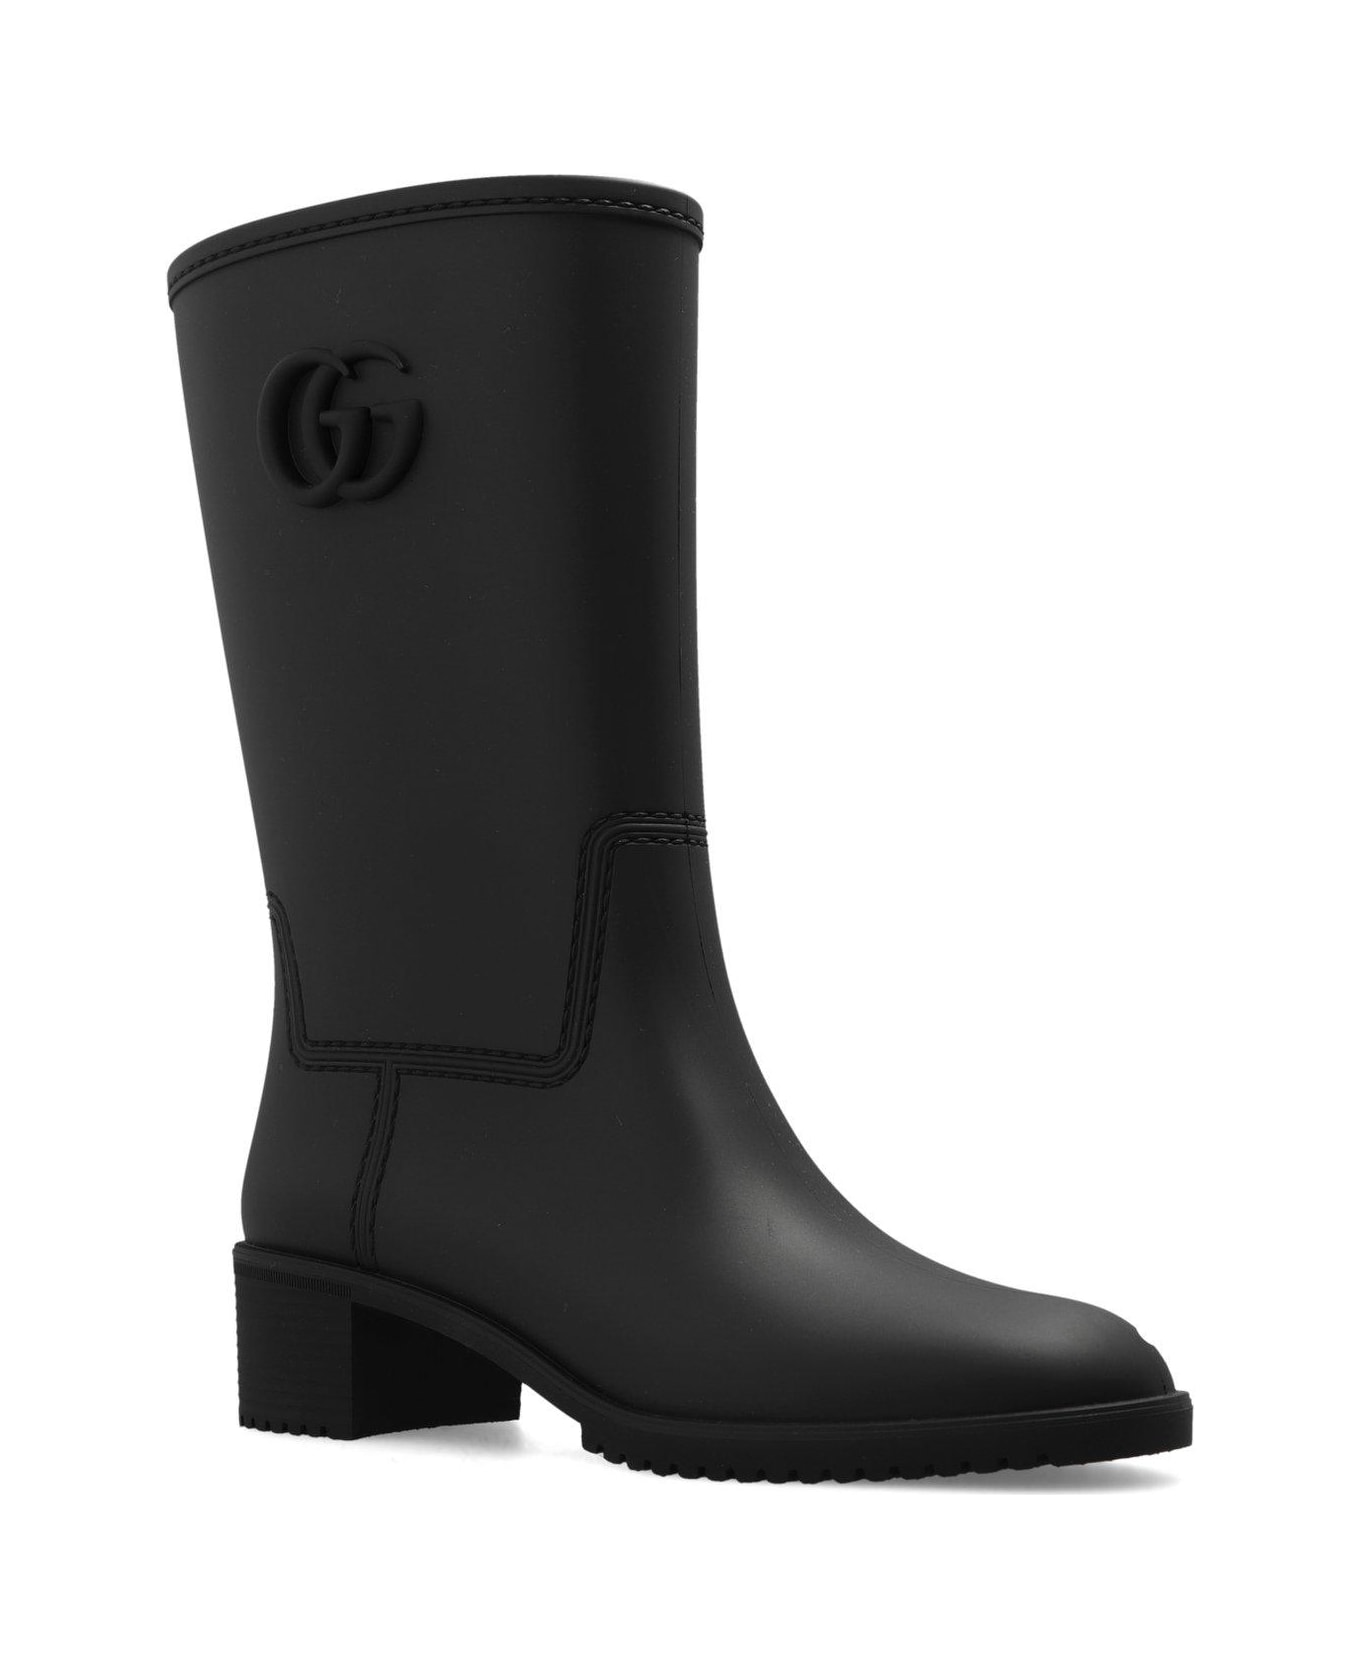 Gucci Double G Boots - Black ブーツ